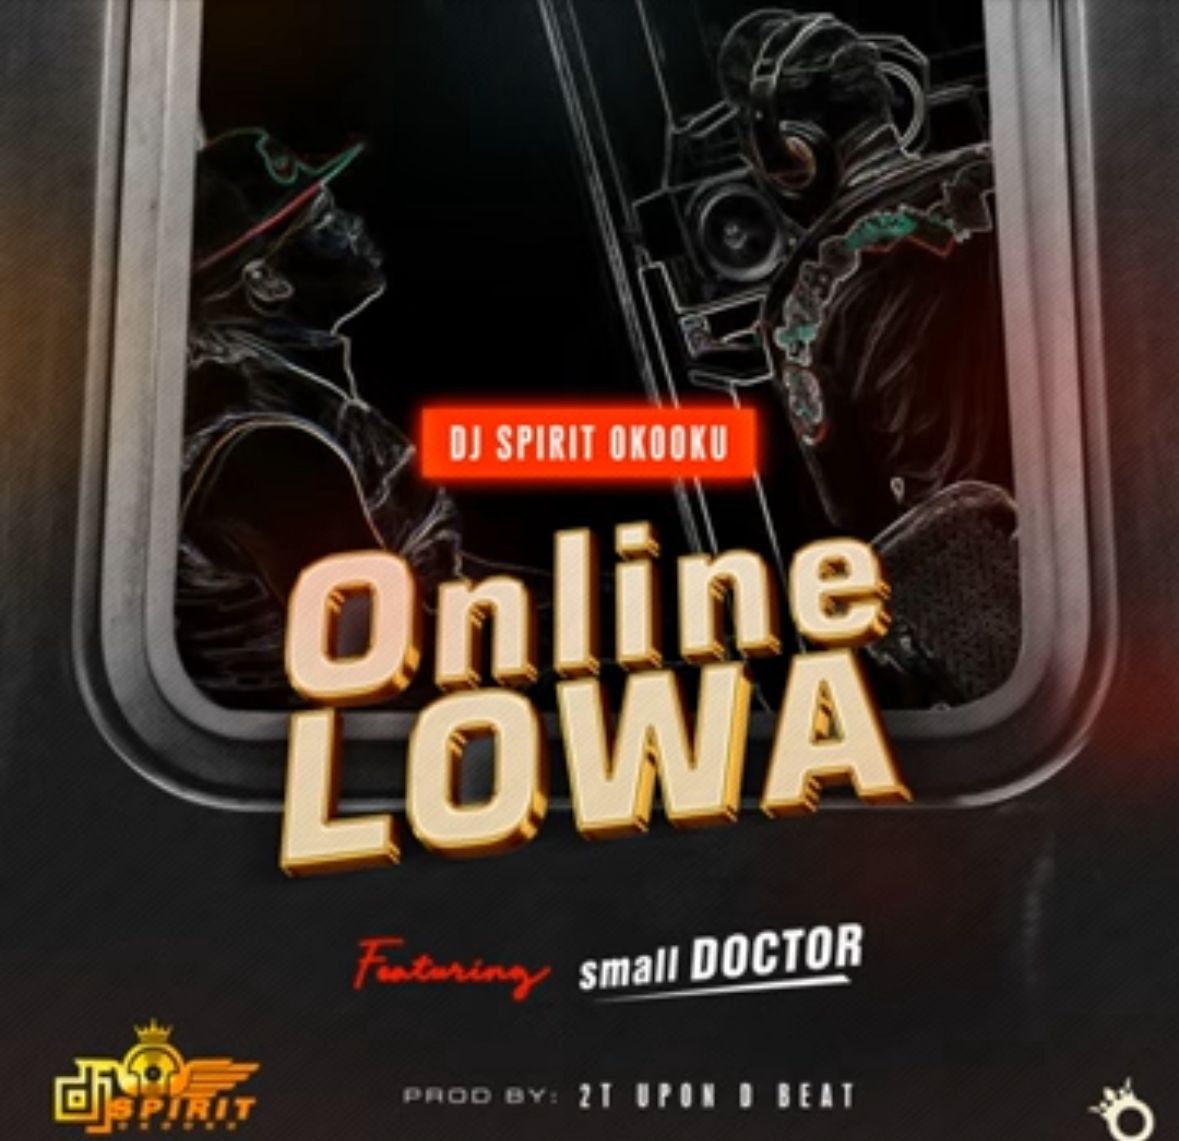 Small Doctor – Online Lowa